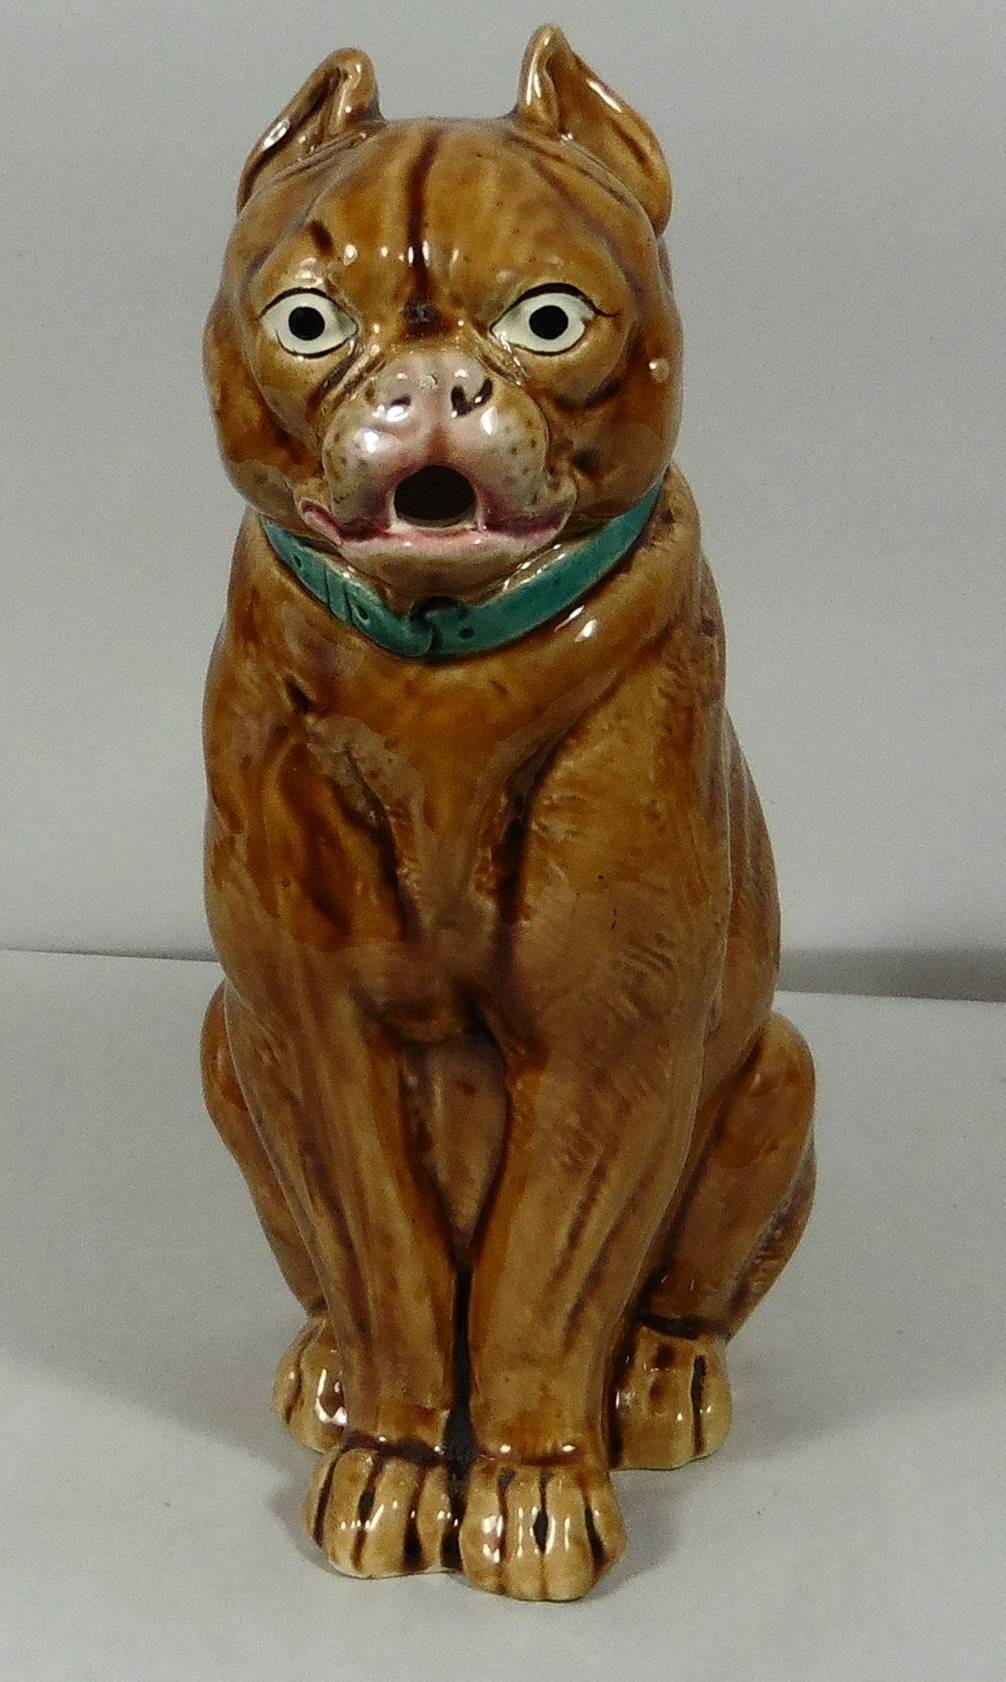 A fine Majolica bulldog pitcher signed George Dreyfus, circa 1890.
The Majolica of Georges Dreyfus are usually colorful in a fine quality of glaze and paintings. It's also a small production which made the pieces rare.